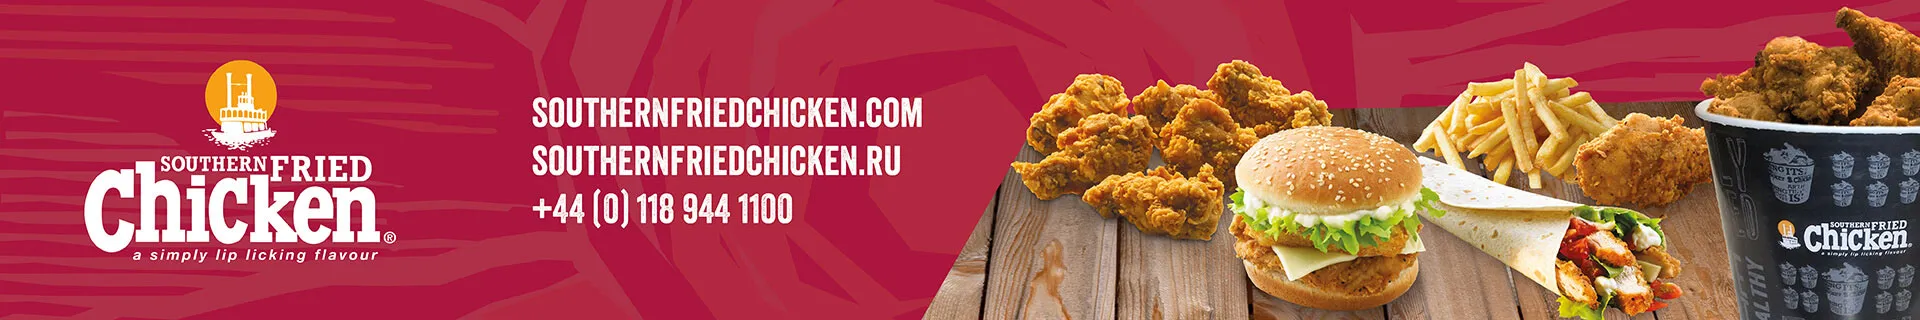 Southern Fried Chicken Franchise